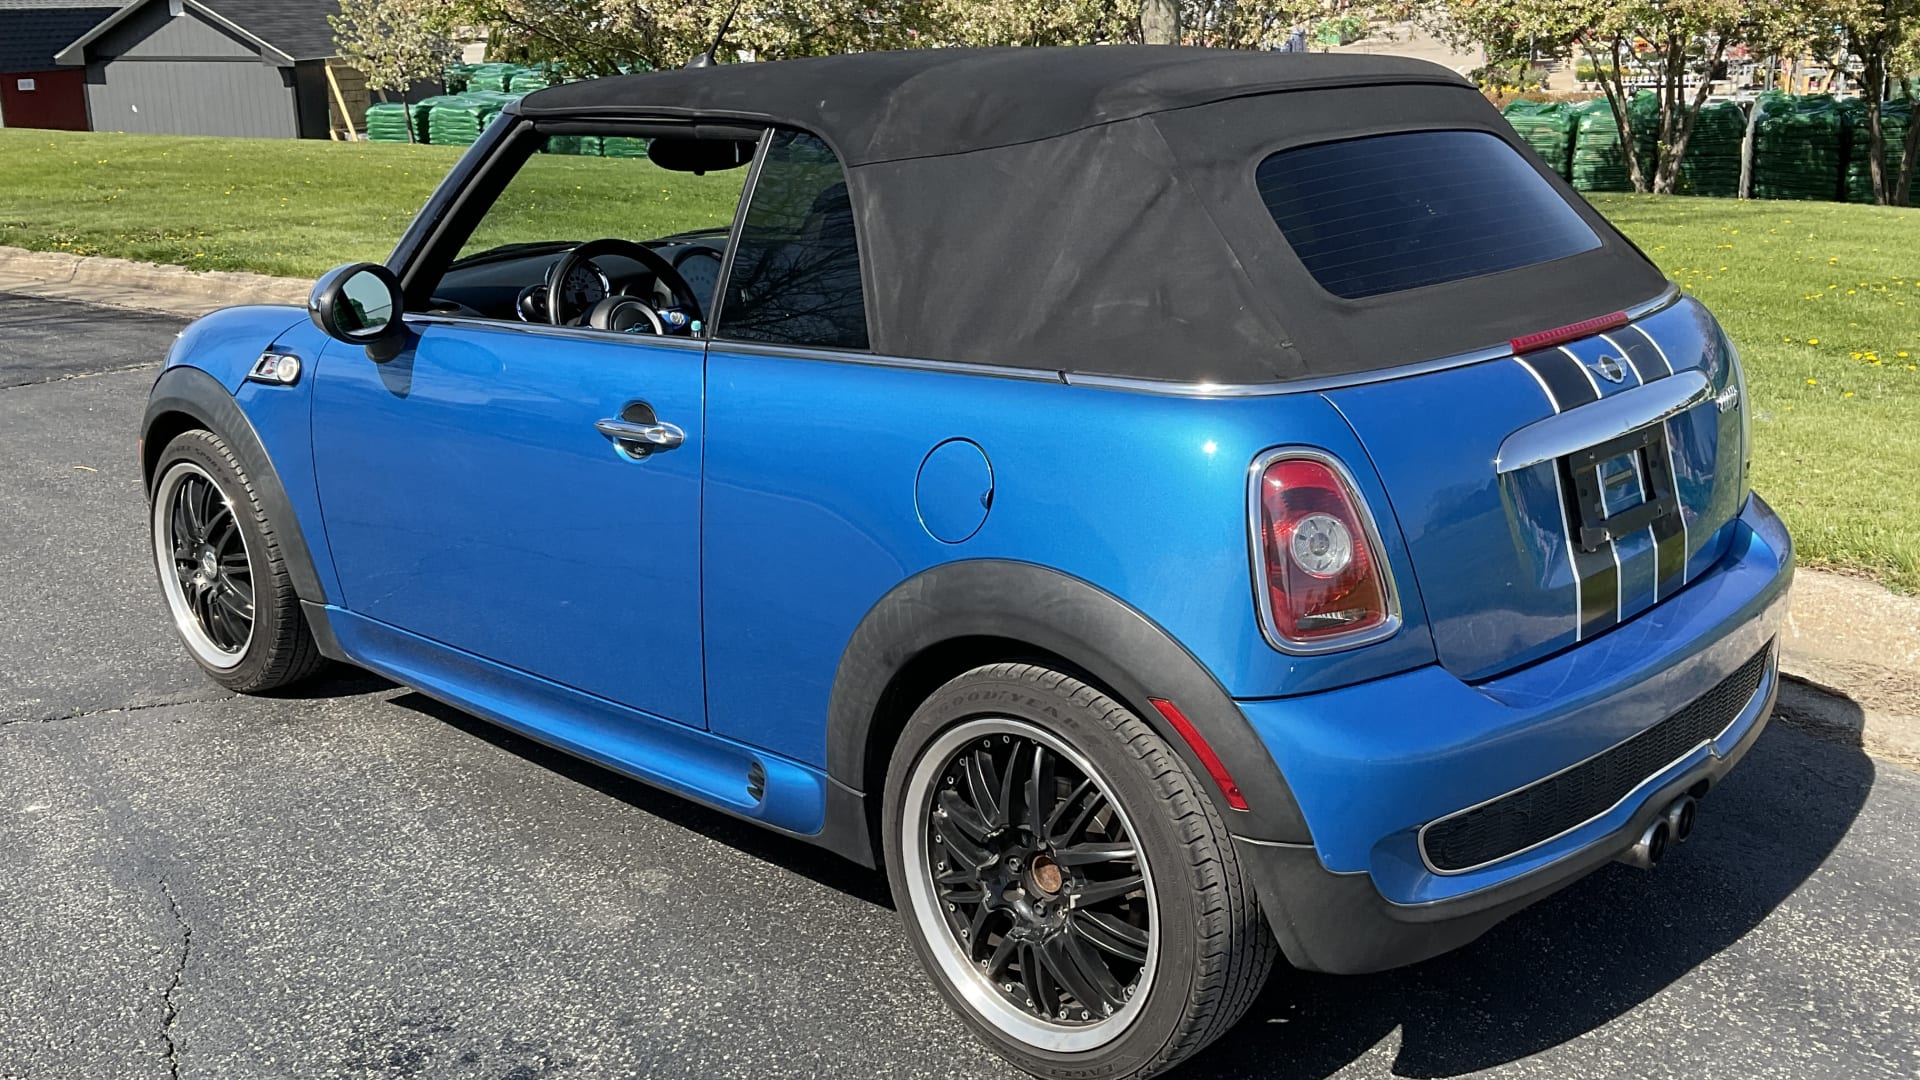 2010 Mini Cooper S John Cooper Works Convertible at Indy 2023 as G56.1 ...